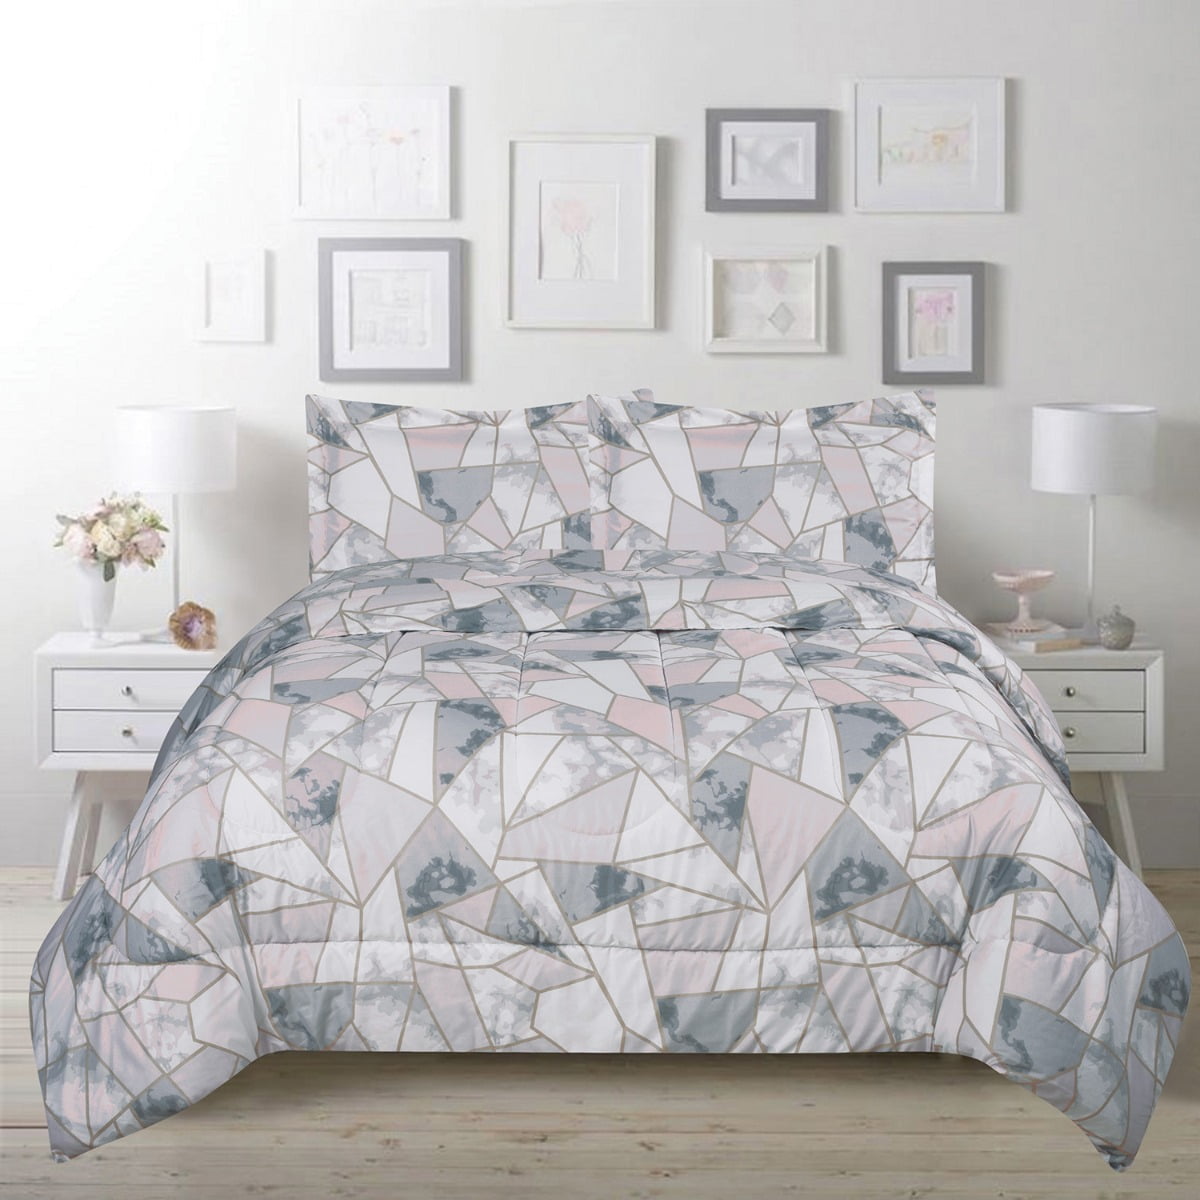 Marble Comforter Set Queen White Gray Marble Printed Bedding Solid Comforter Set 